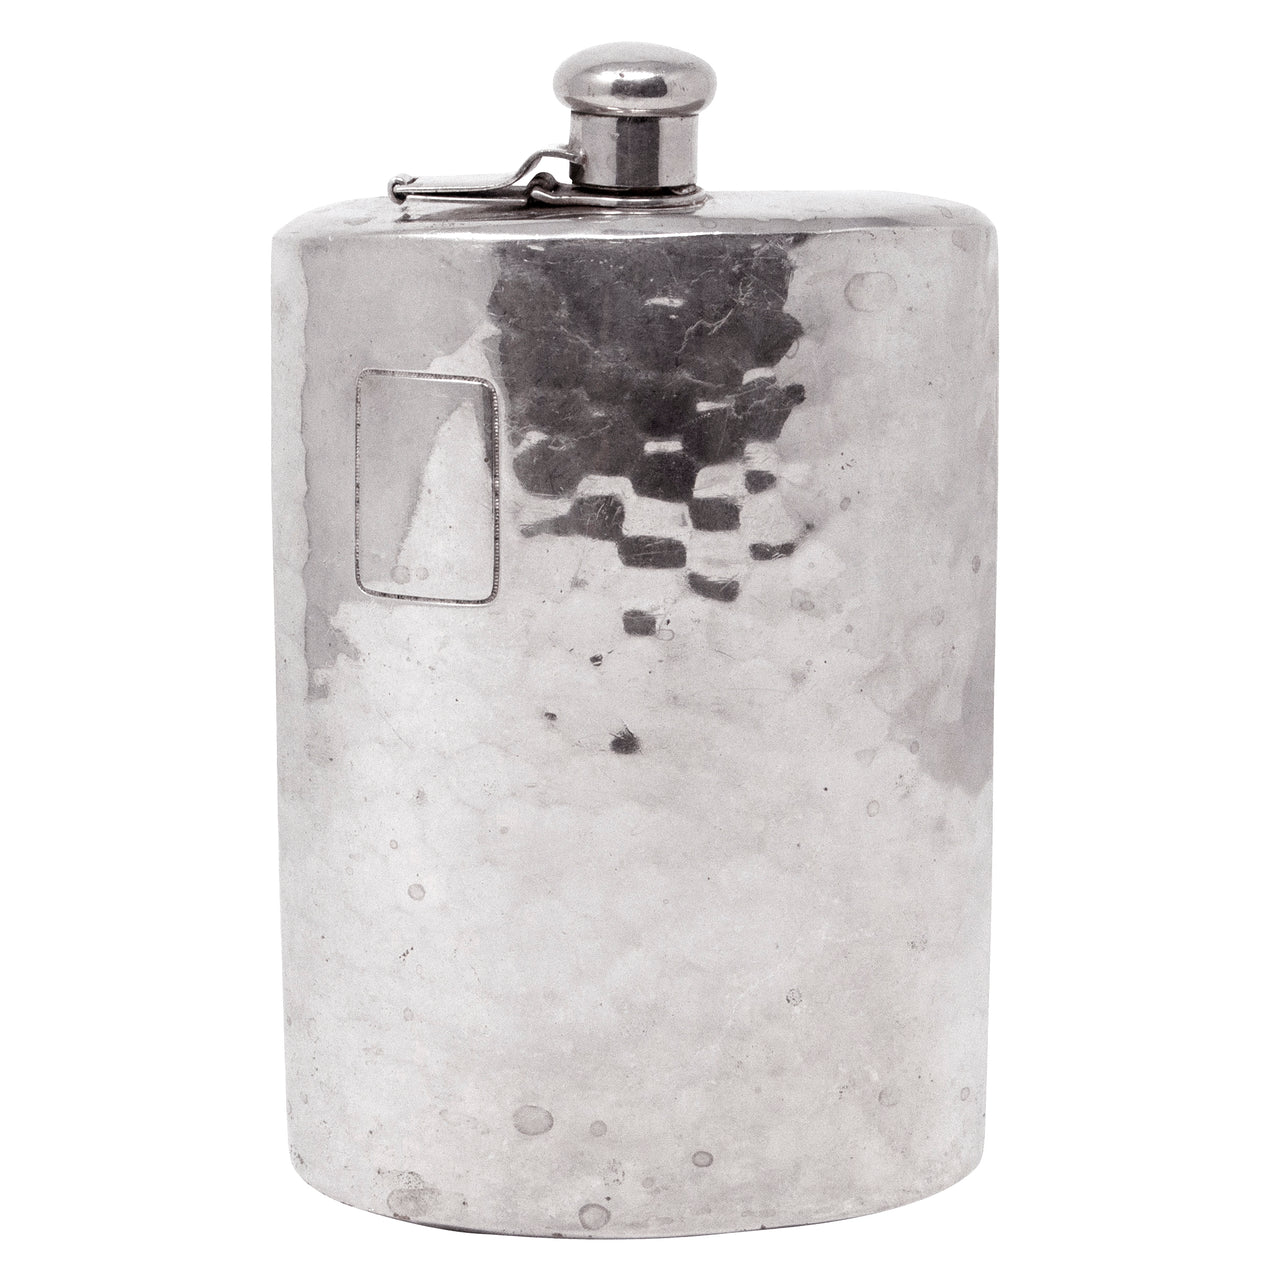 Hammered Chrome Plated German Hip Flask